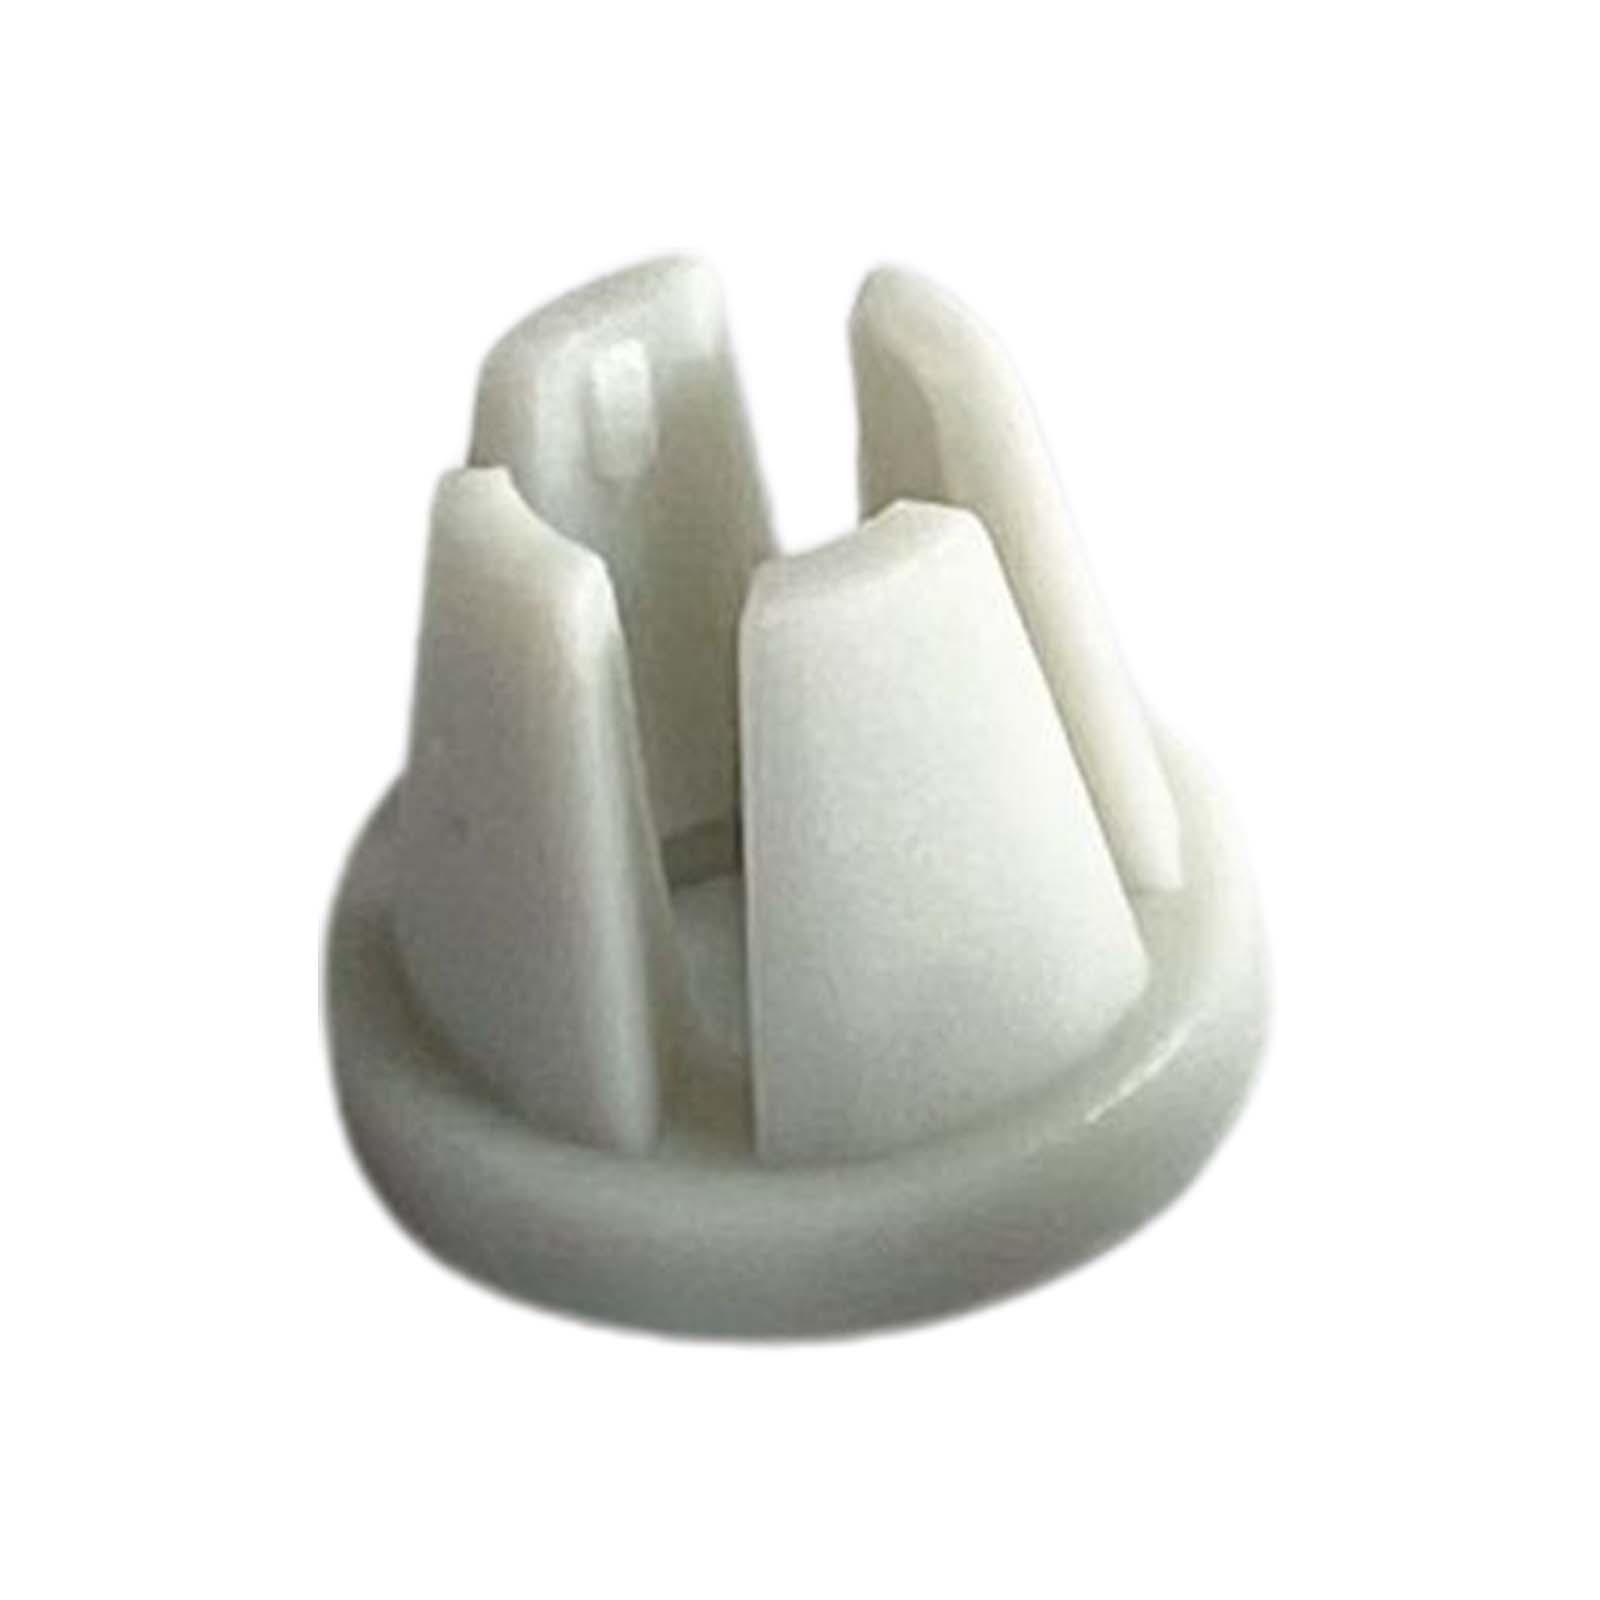 Spool Cap Sewing, Thread Holder Gear Sewing Machine Accessories, Home Household Machine Spool Cover for TA10943209S, Domestic Sewing Machine